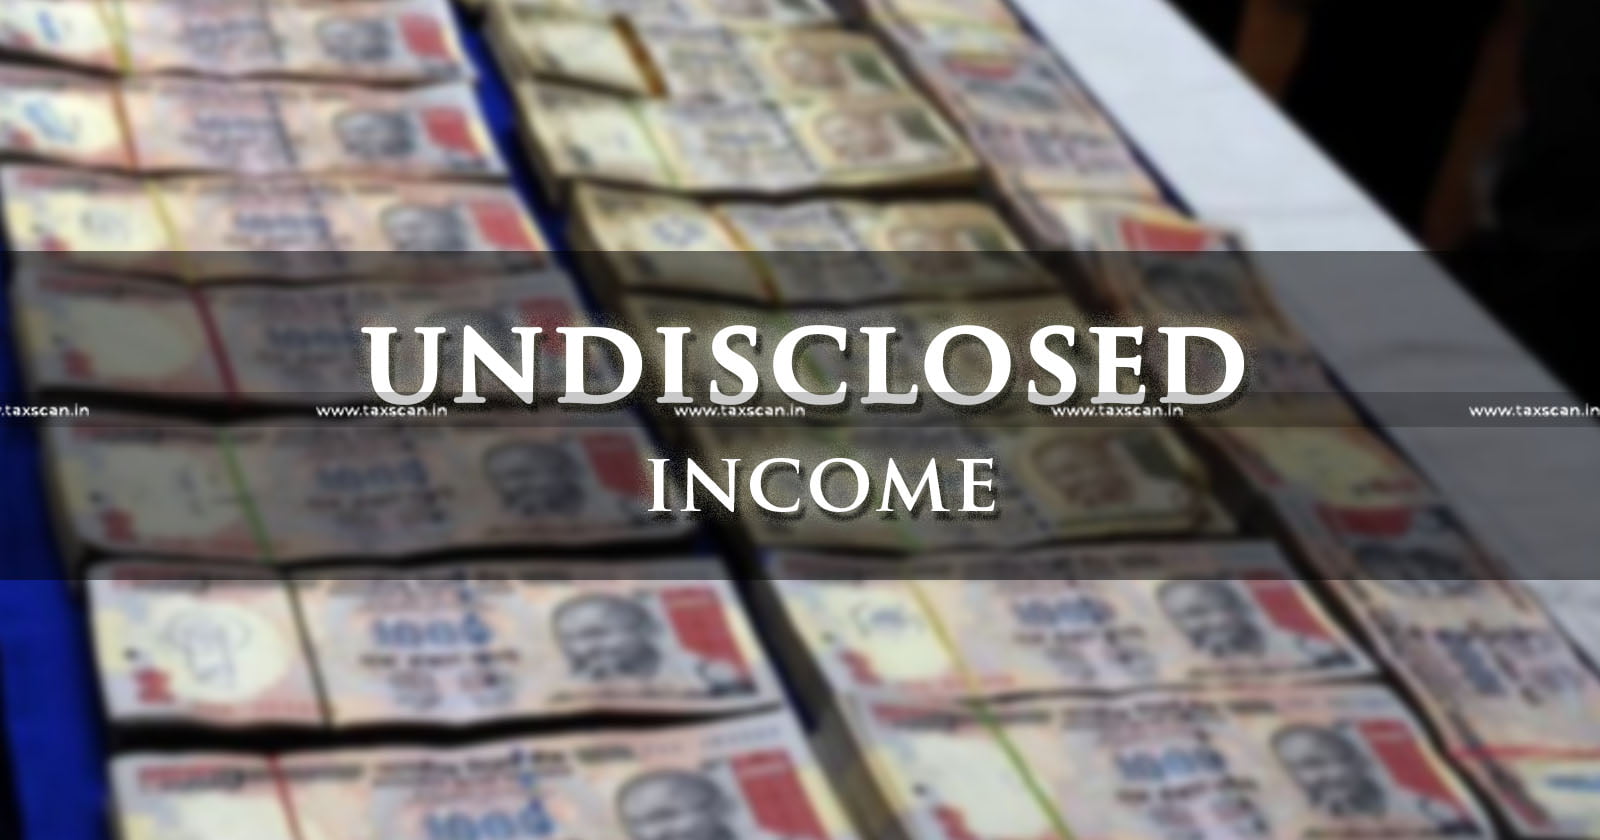 Penalty - Assessee Disclosed Undisclosed Income - Assessee - Undisclosed Income - Statement - ITAT - Taxscan